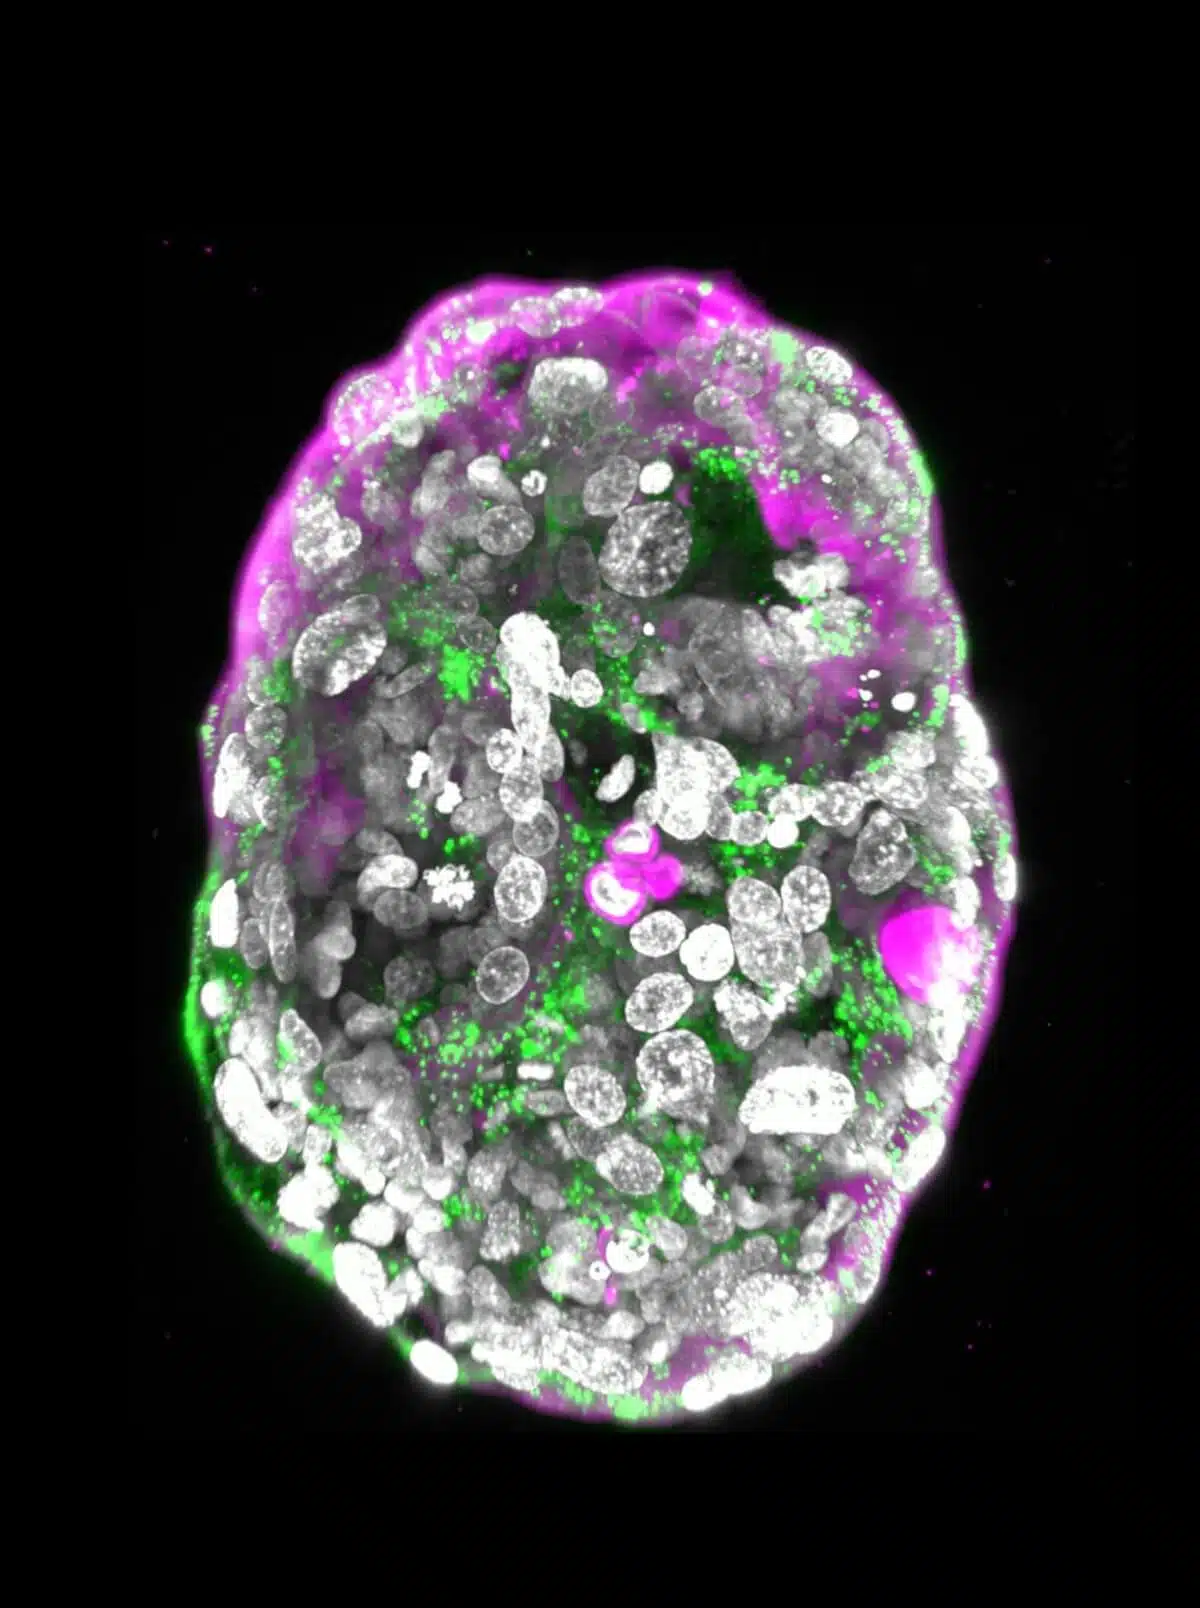 Microscope image of the embryonic model at a developmental stage corresponding to day 14. The outer layer which will become the placenta (pink), contains spaces called "lacuns". In a normal pregnancy, the lacunae allow the passage of nutrients from the mother's circulation. In green - the molecules of the hormone used in pregnancy tests